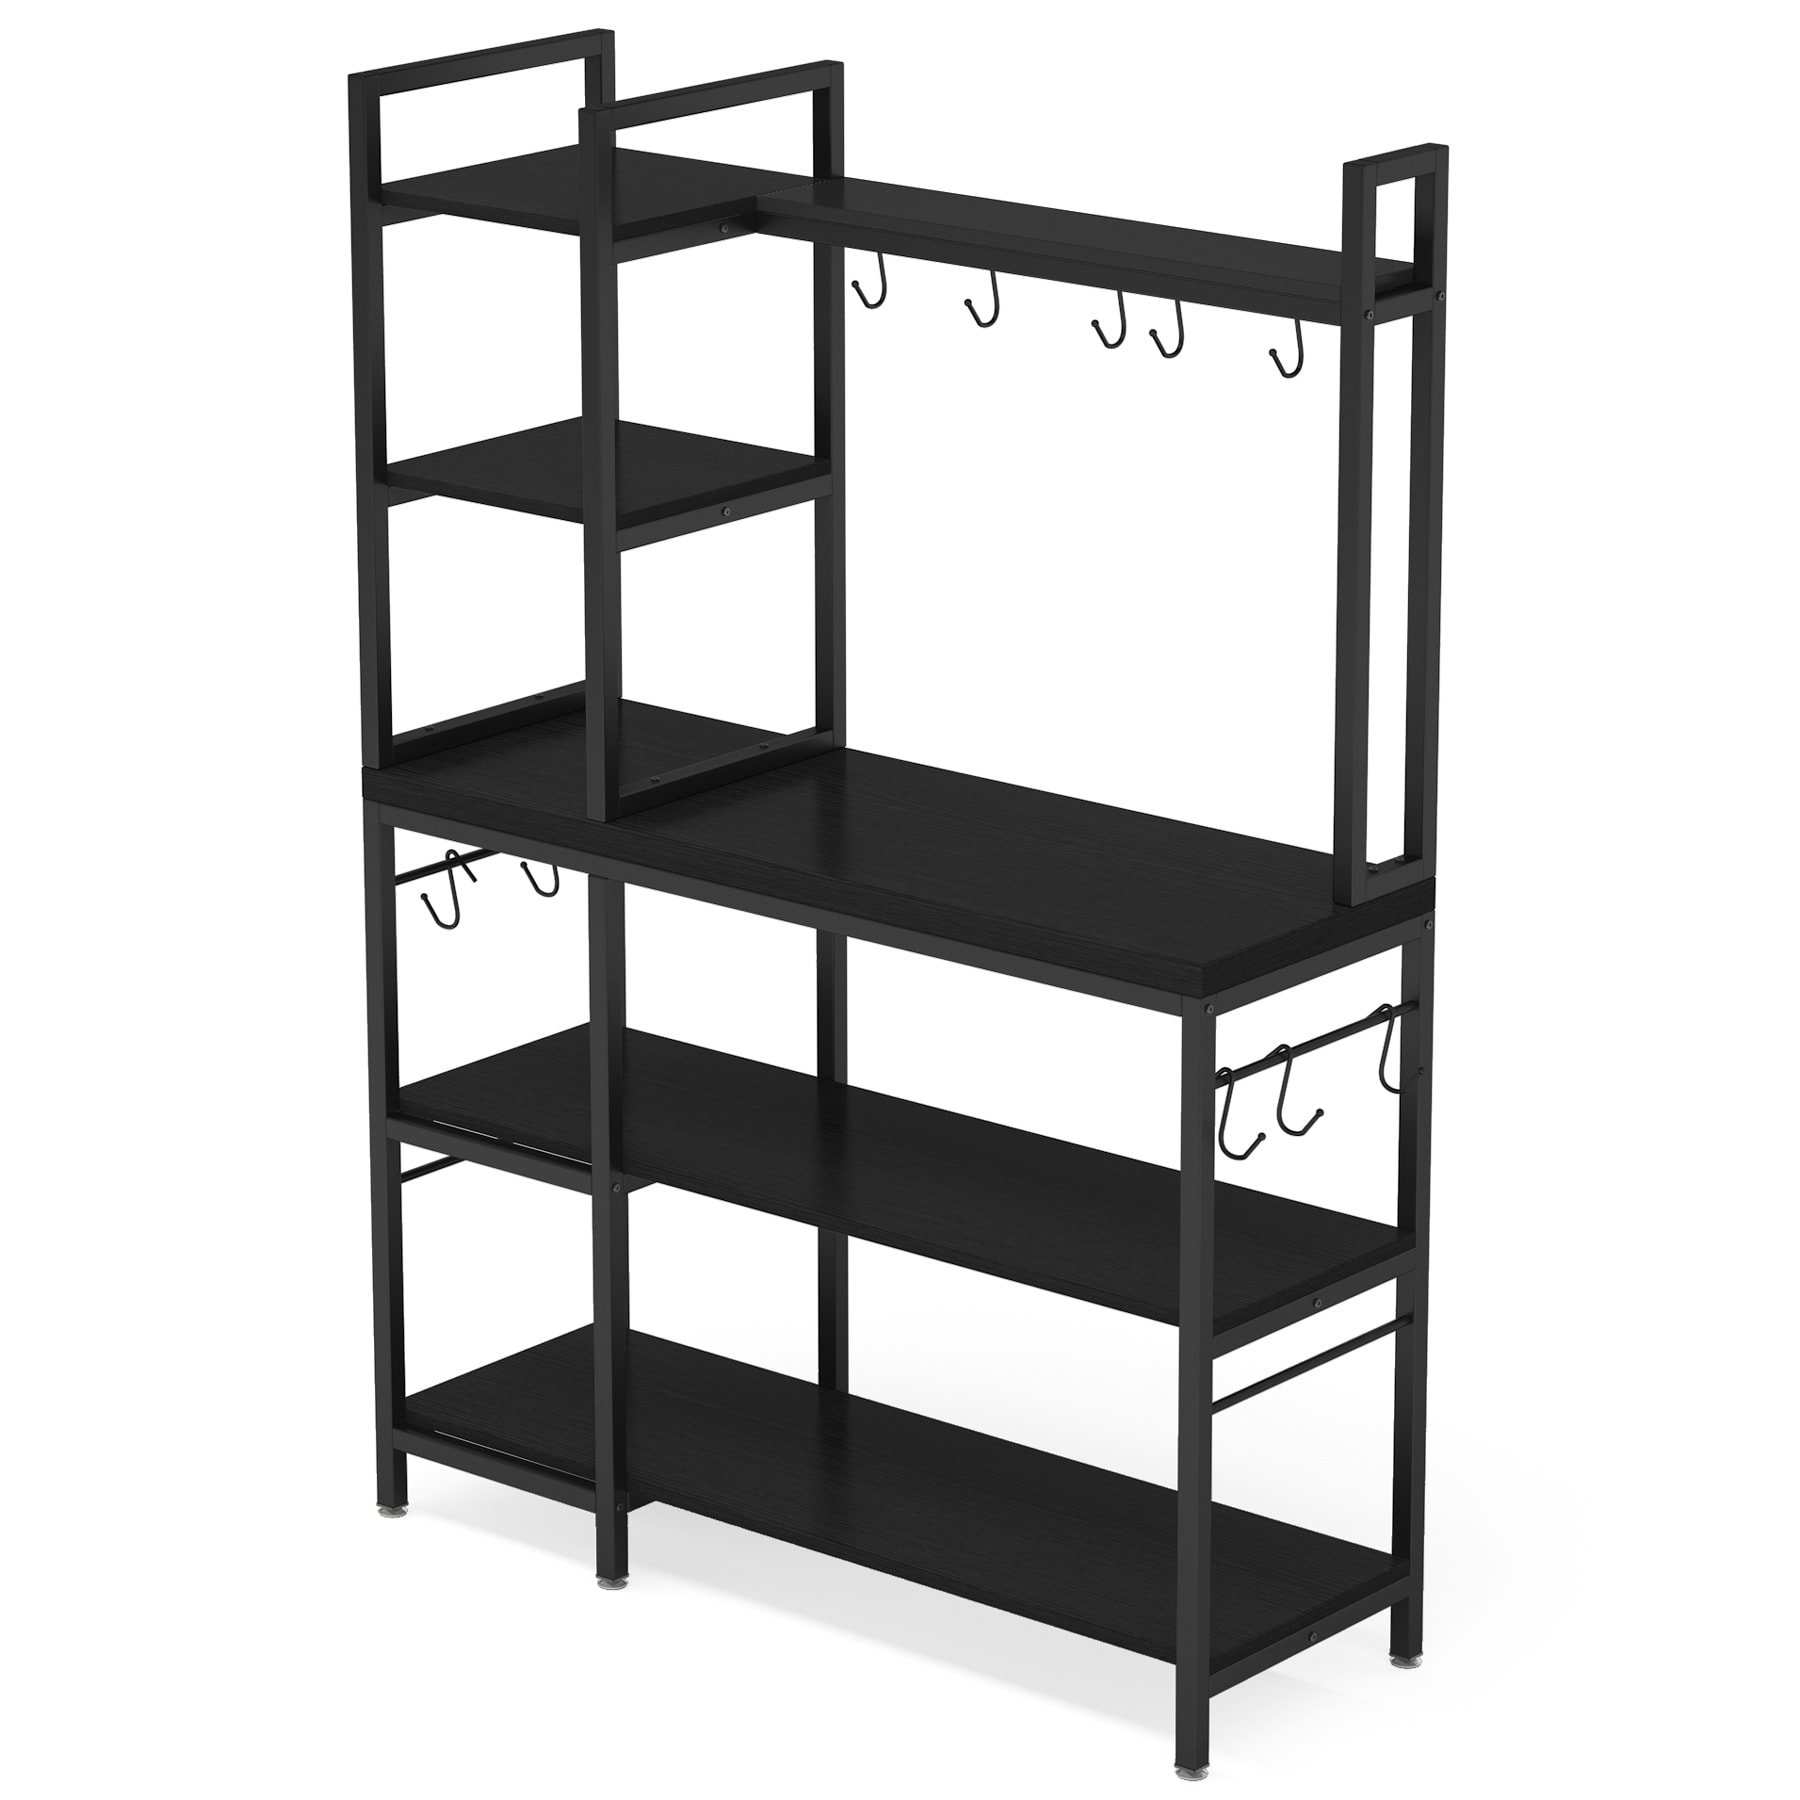 https://ak1.ostkcdn.com/images/products/is/images/direct/d5ebcbd34a926adae64f1df7105c86e561abbdbc/Kitchen-Bakers-Rack-with-Storage%2C-43-inch-Microwave-Stand-5-Tier-Kitchen-Utility-Storage-Shelf.jpg